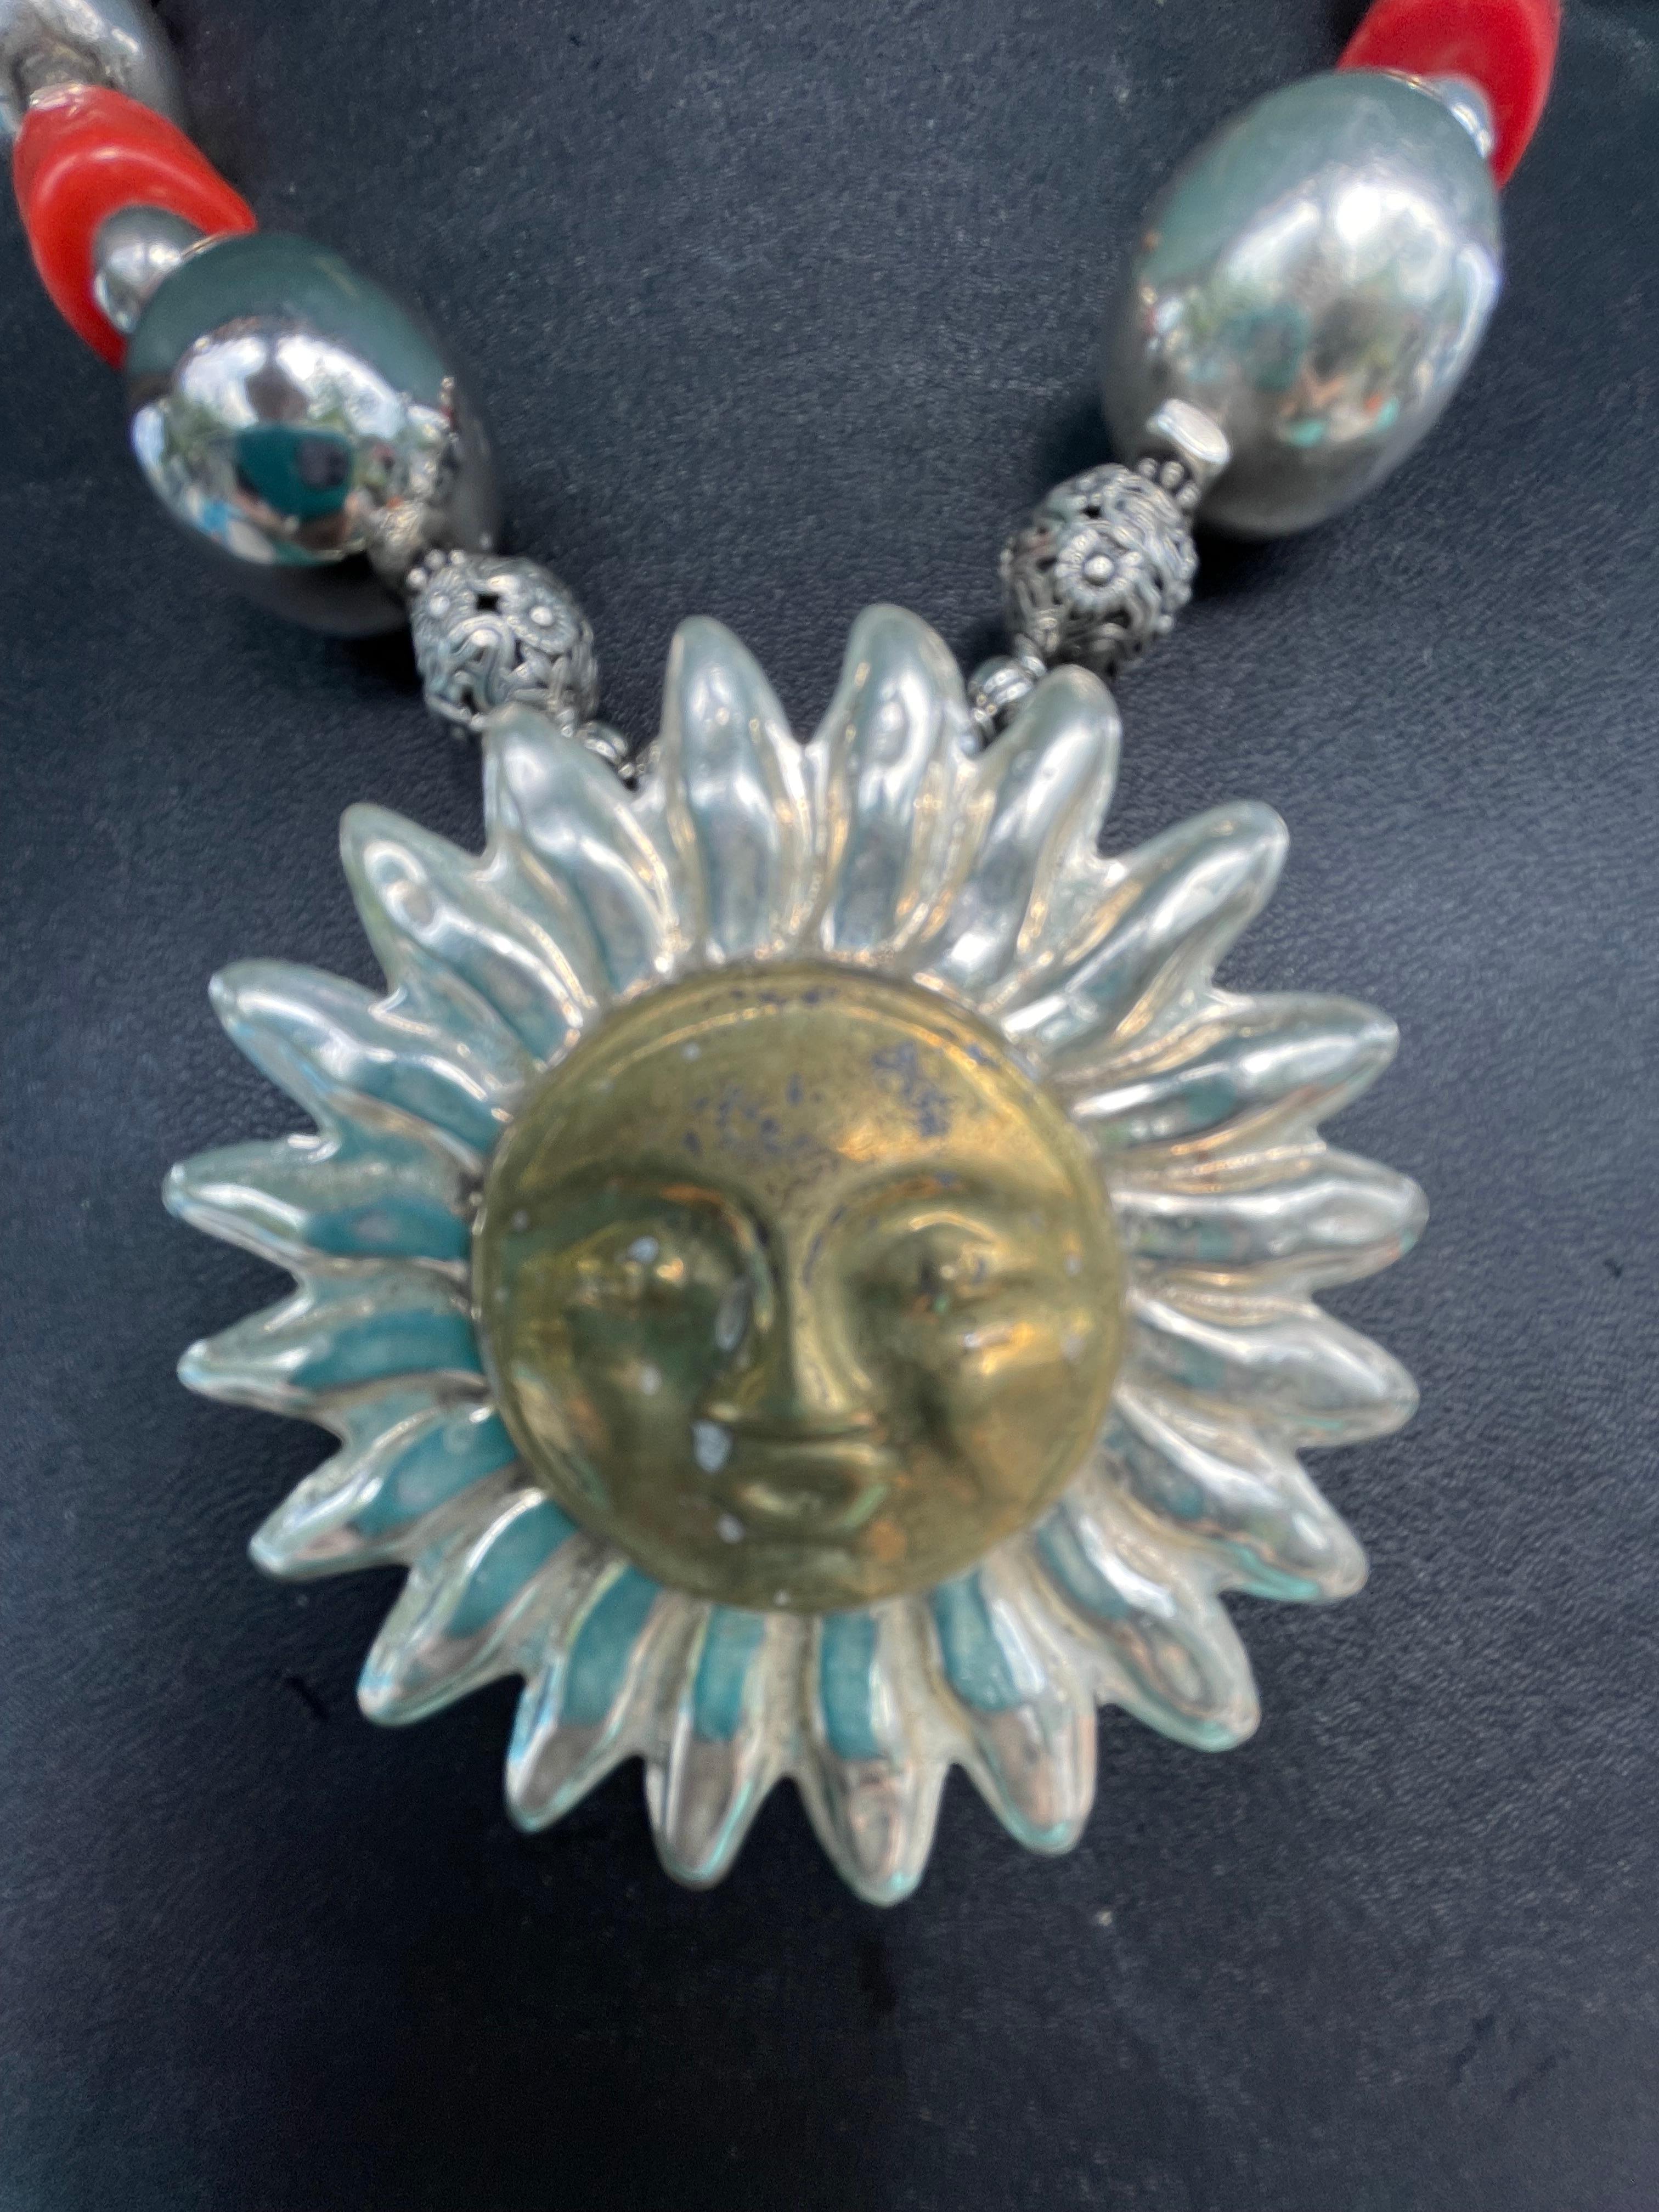 Lorraine’s Bijoux offers a stunning necklace with a large Mexican Sterling and Brass Sun Pendant as its center. This amazing necklace consists of Chinese coral, Italian coral, and vintage Mexican Sterling Silver highly polished beads.The handmade